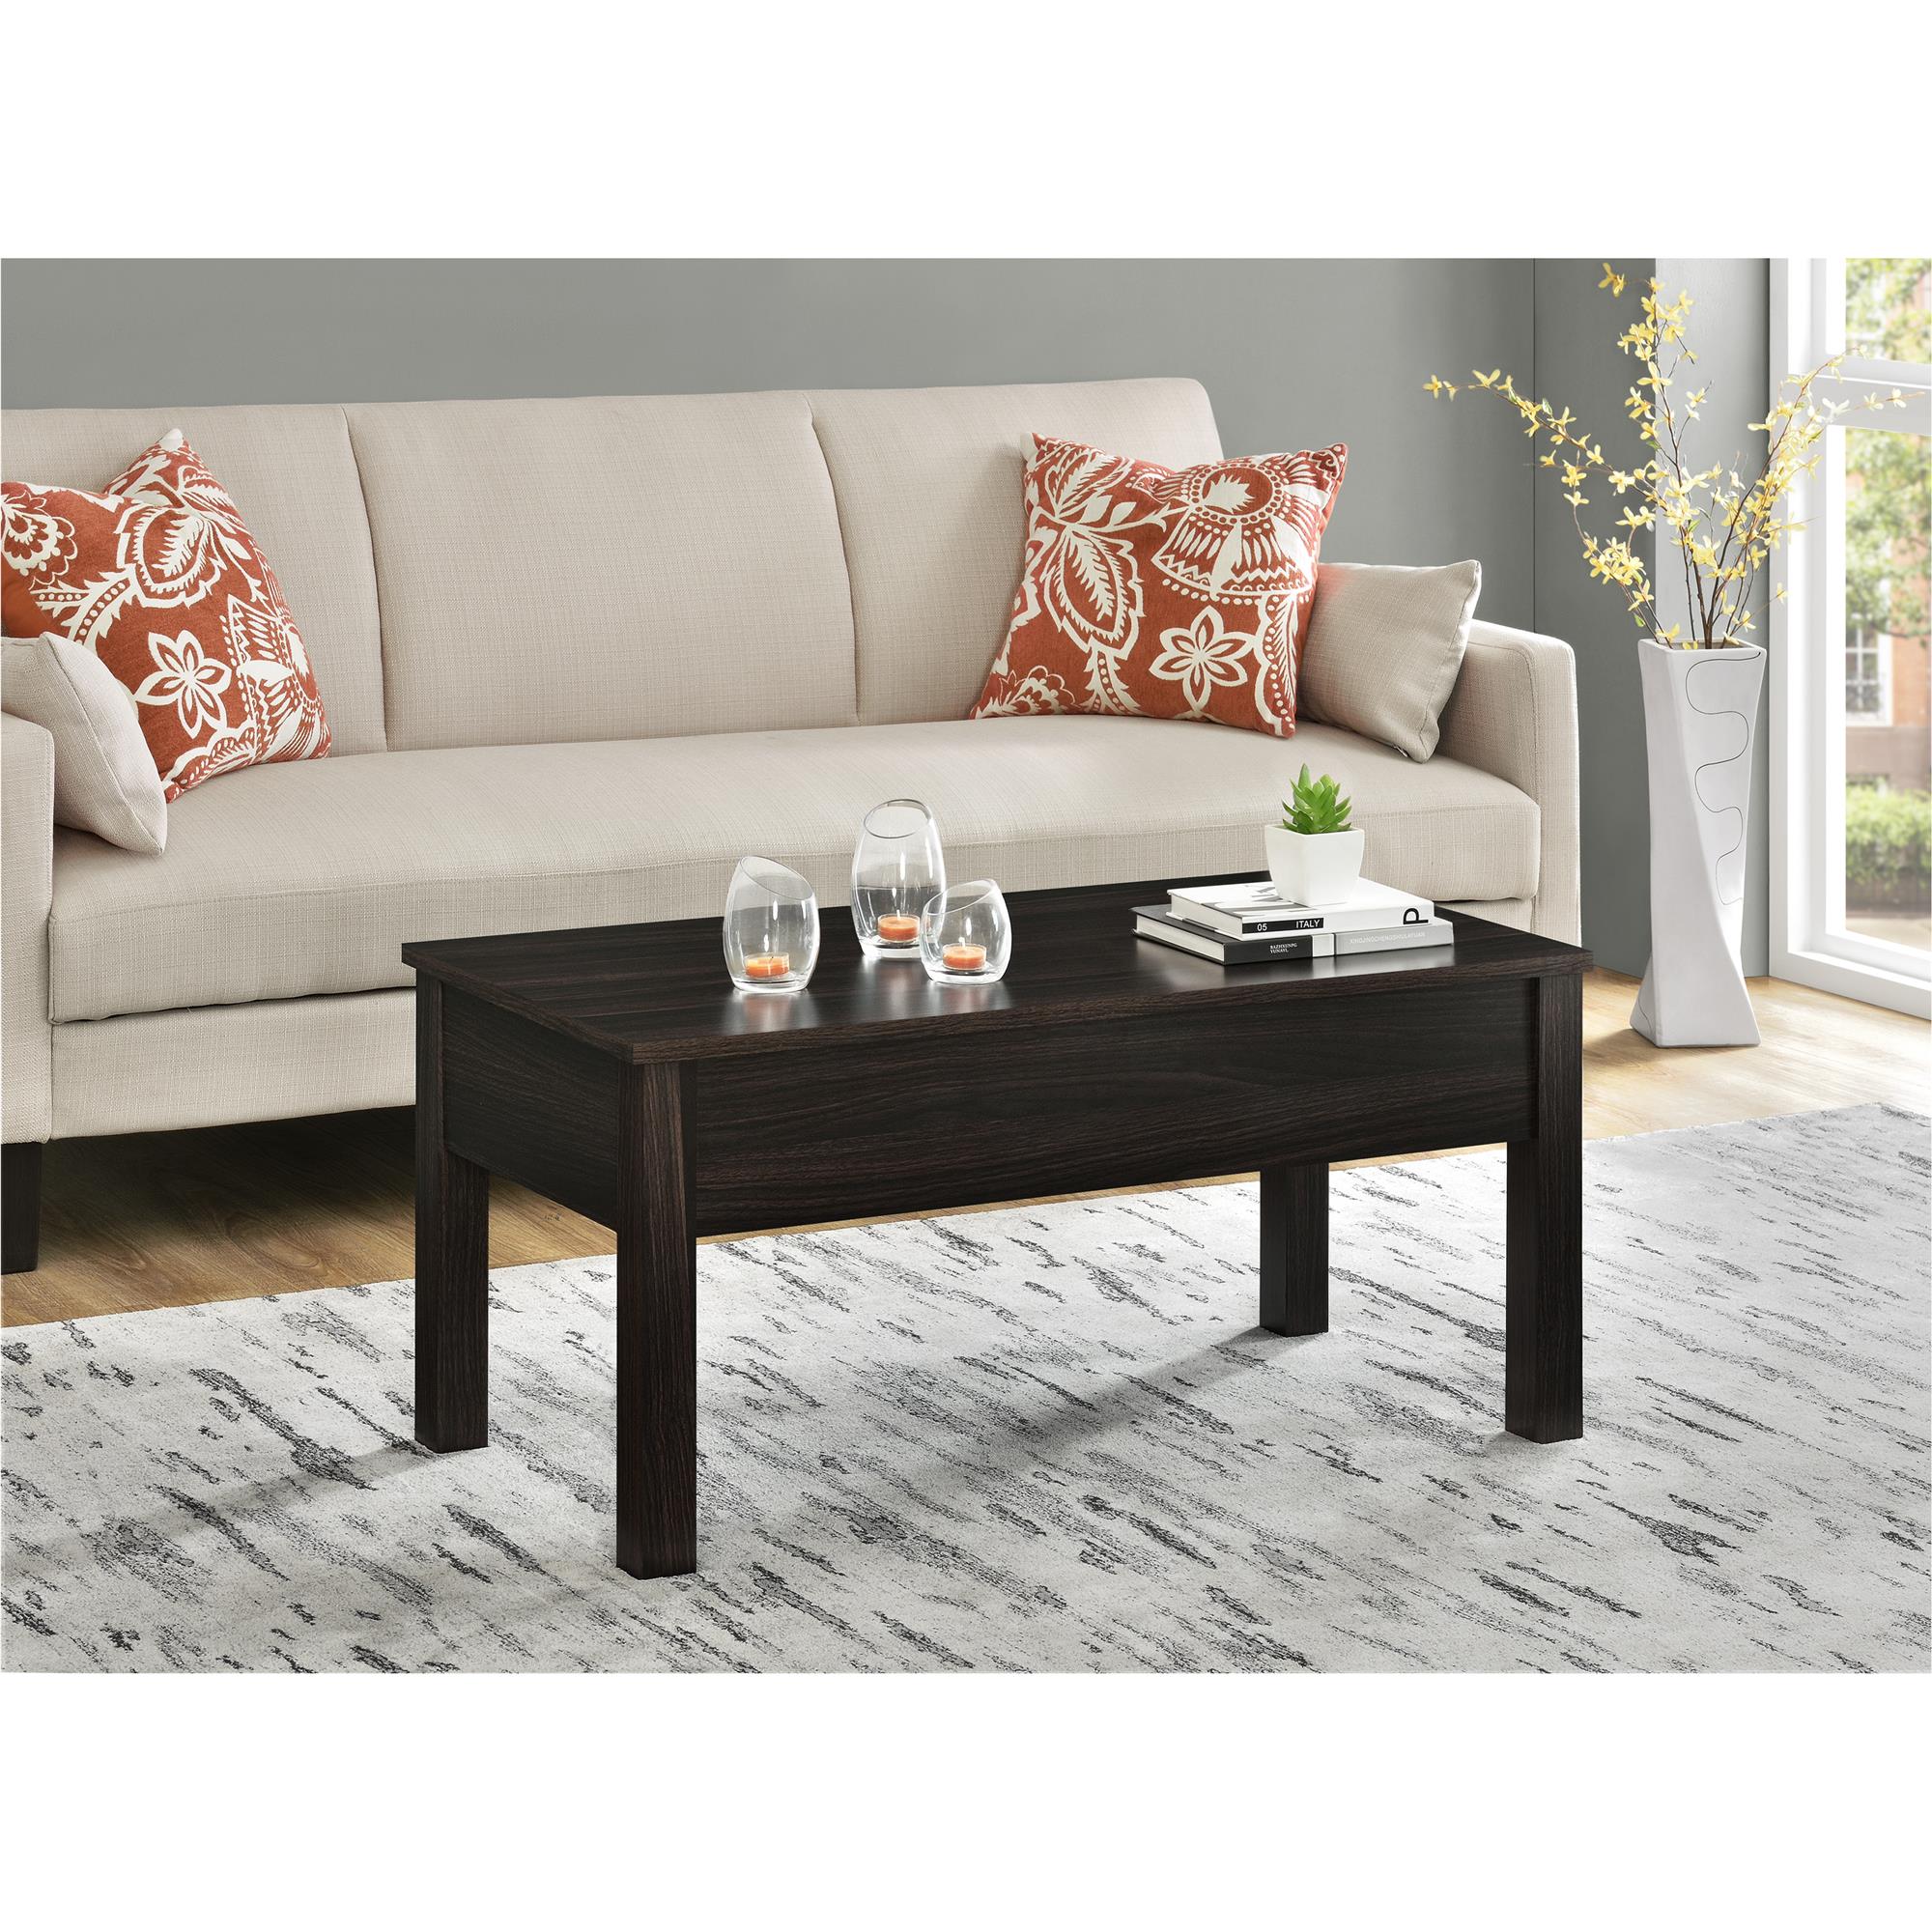 Mainstays Lift Top Coffee Table, Espresso - image 2 of 14